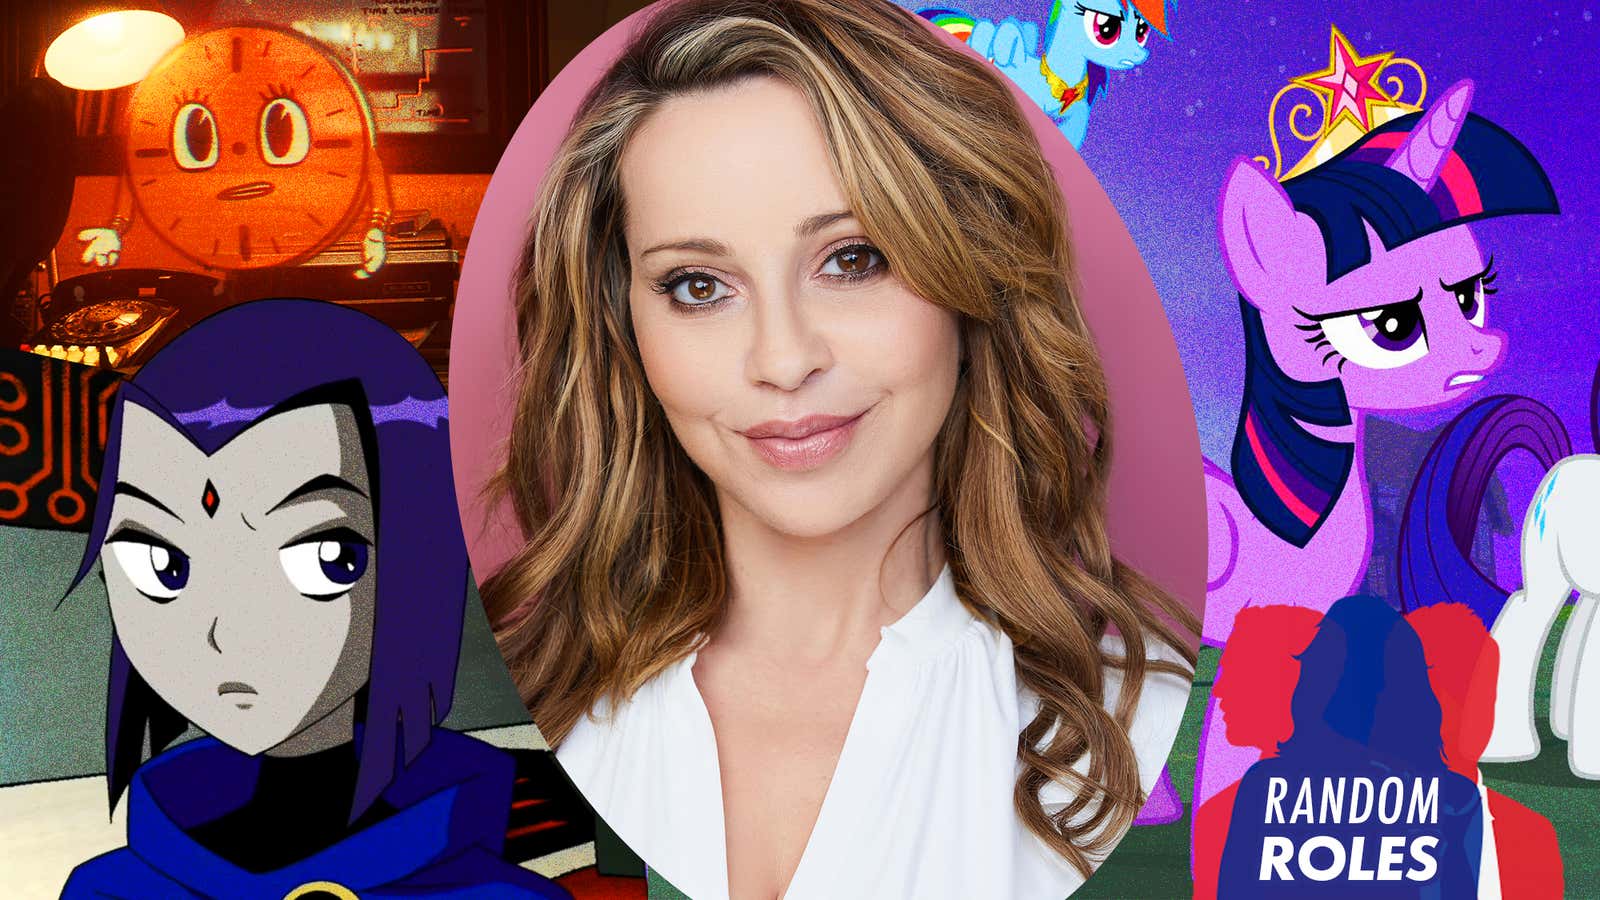 Main image: Tara Strong (Photo: Cathryn Farnsworth). Background images, clockwise from top left: Miss Minutes from Loki (Image: Marvel Studios), Twilight Sparkle from My Little Pony (Image: The Hub), Raven from Teen Titans (Screenshot: Teen Titans)